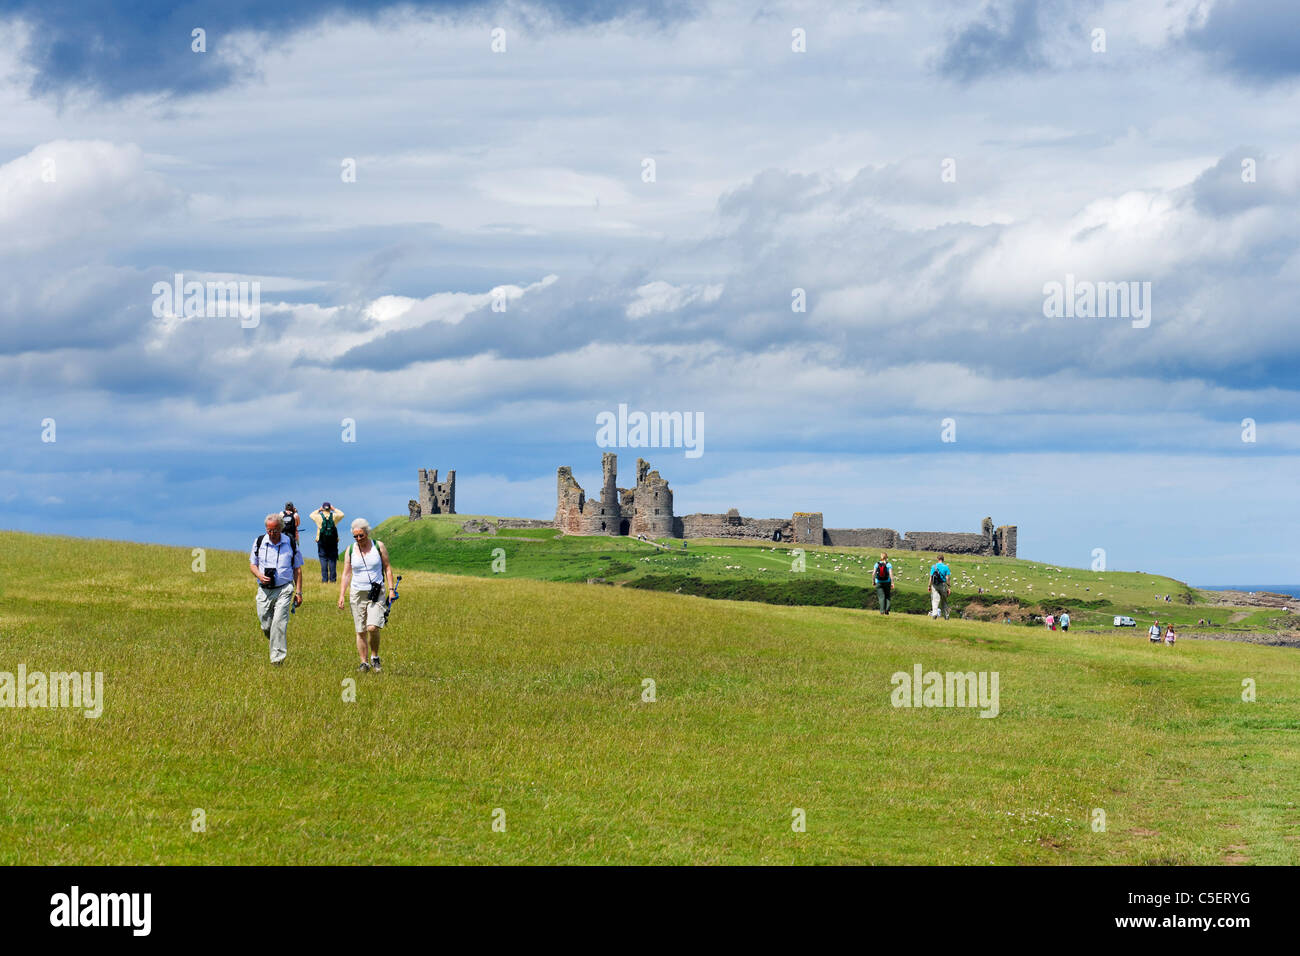 Walkers on the path between Craster and Dunstanburgh Castle on the Northumberland coast, North East England, UK Stock Photo